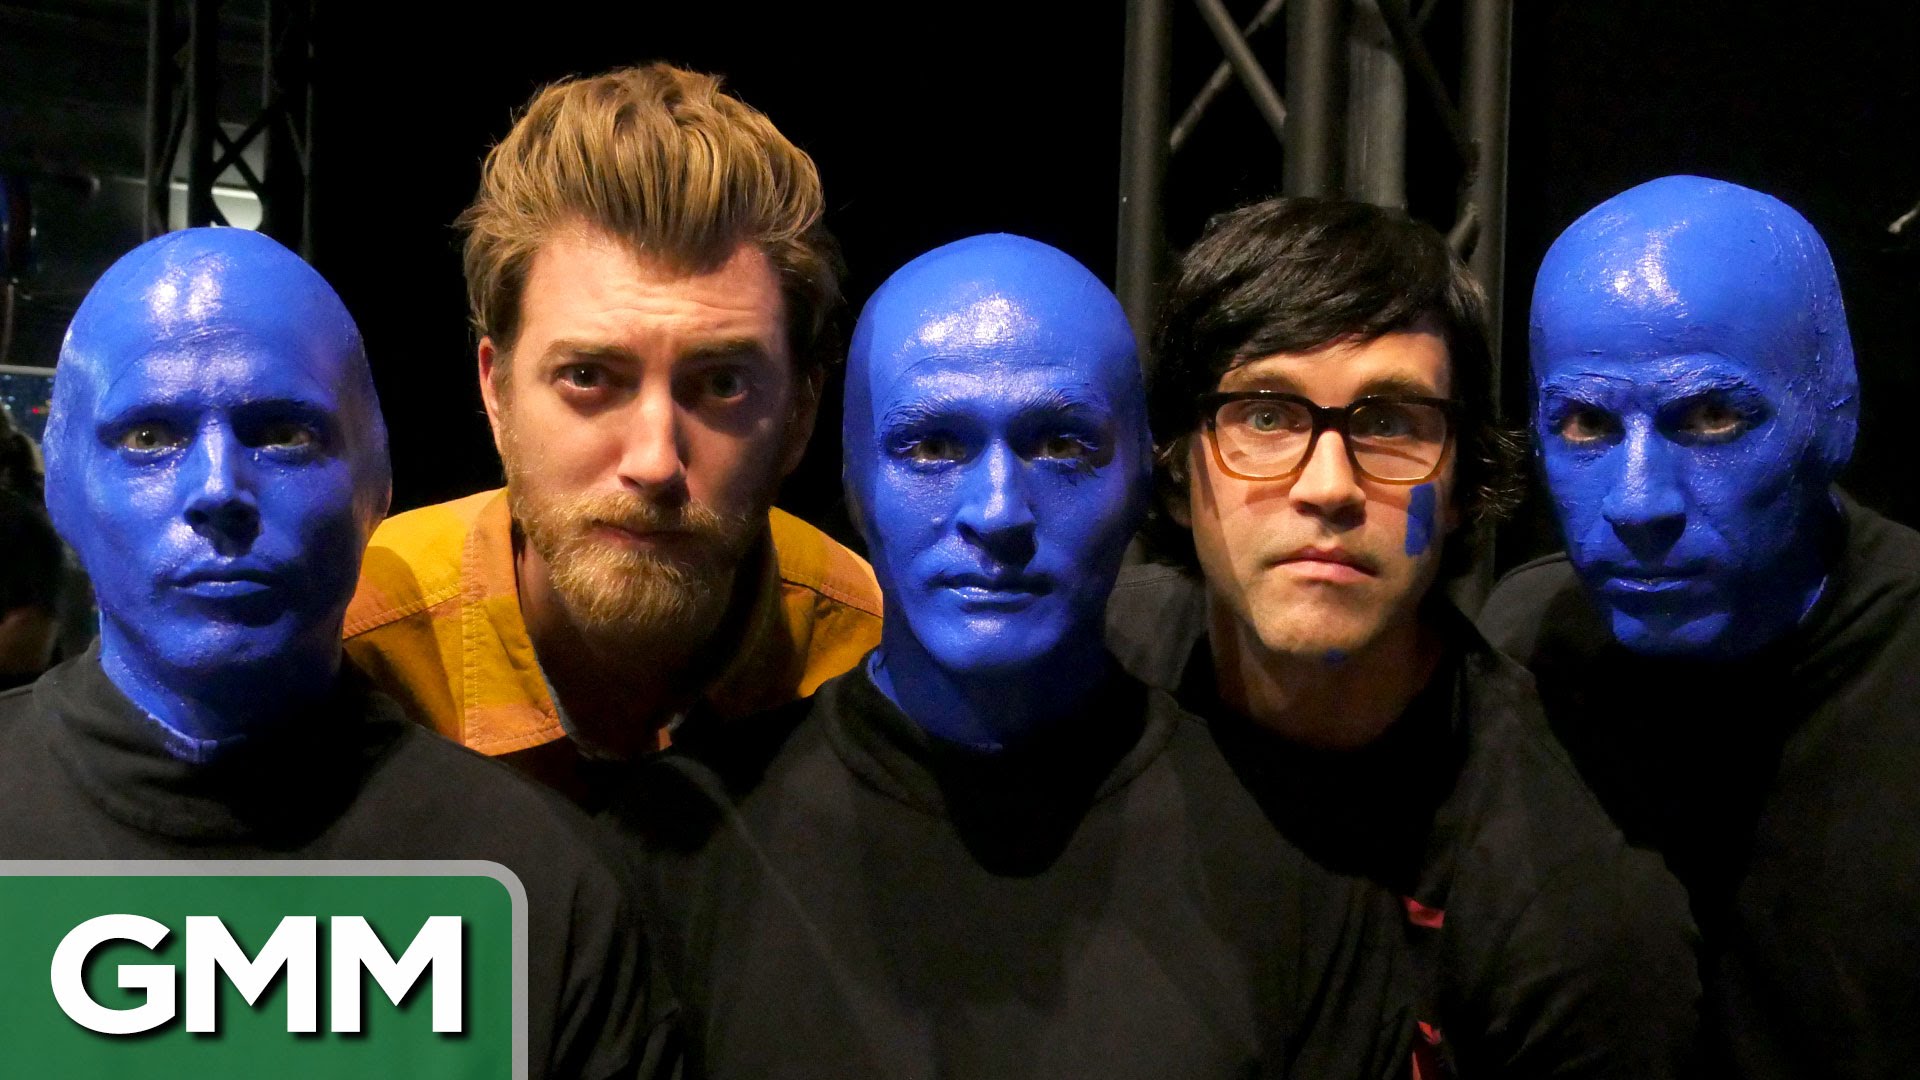 Amazing Blue Man Group Pictures & Backgrounds